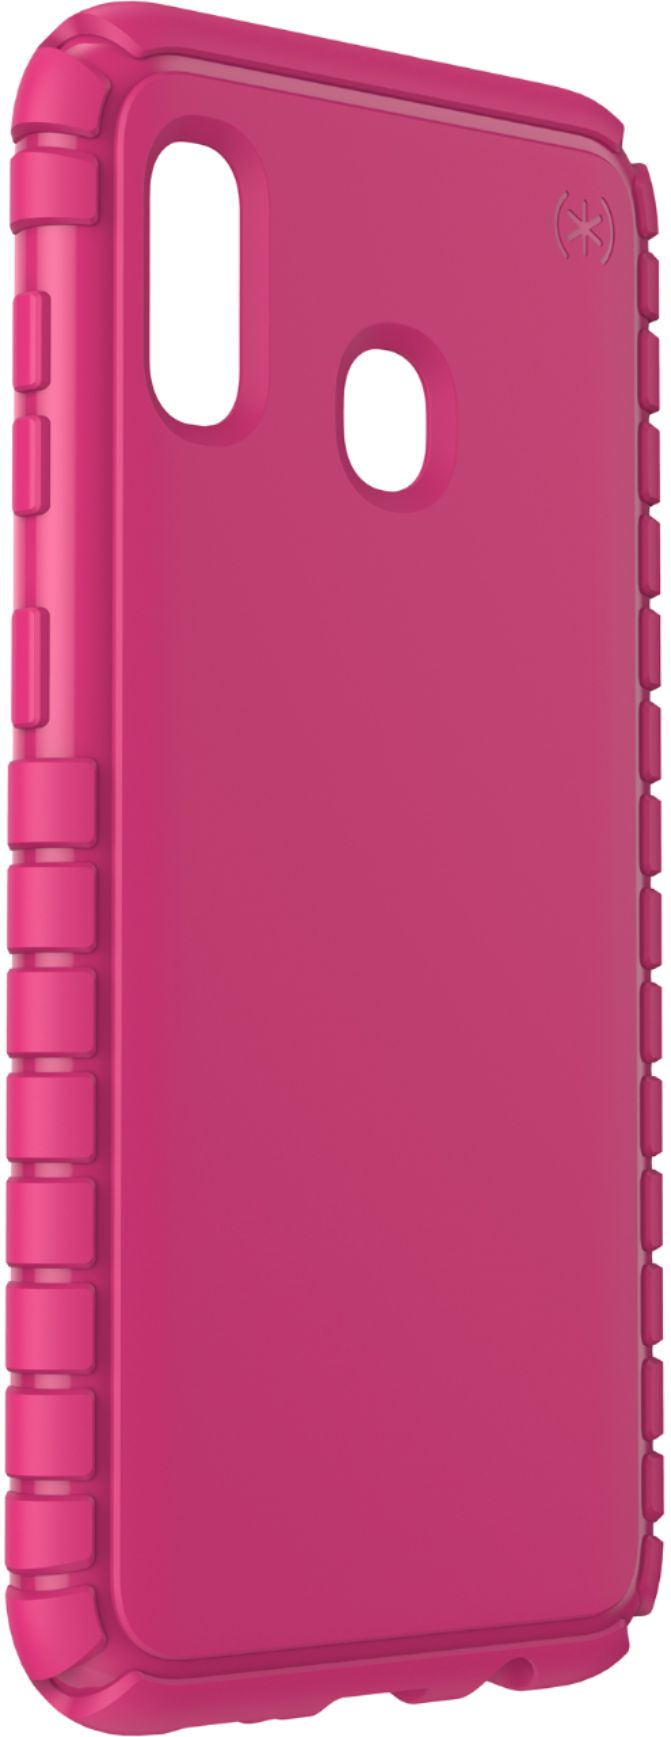 Angle View: Speck - ToughSkin Case for Samsung Galaxy A20 - Beetroot Pink